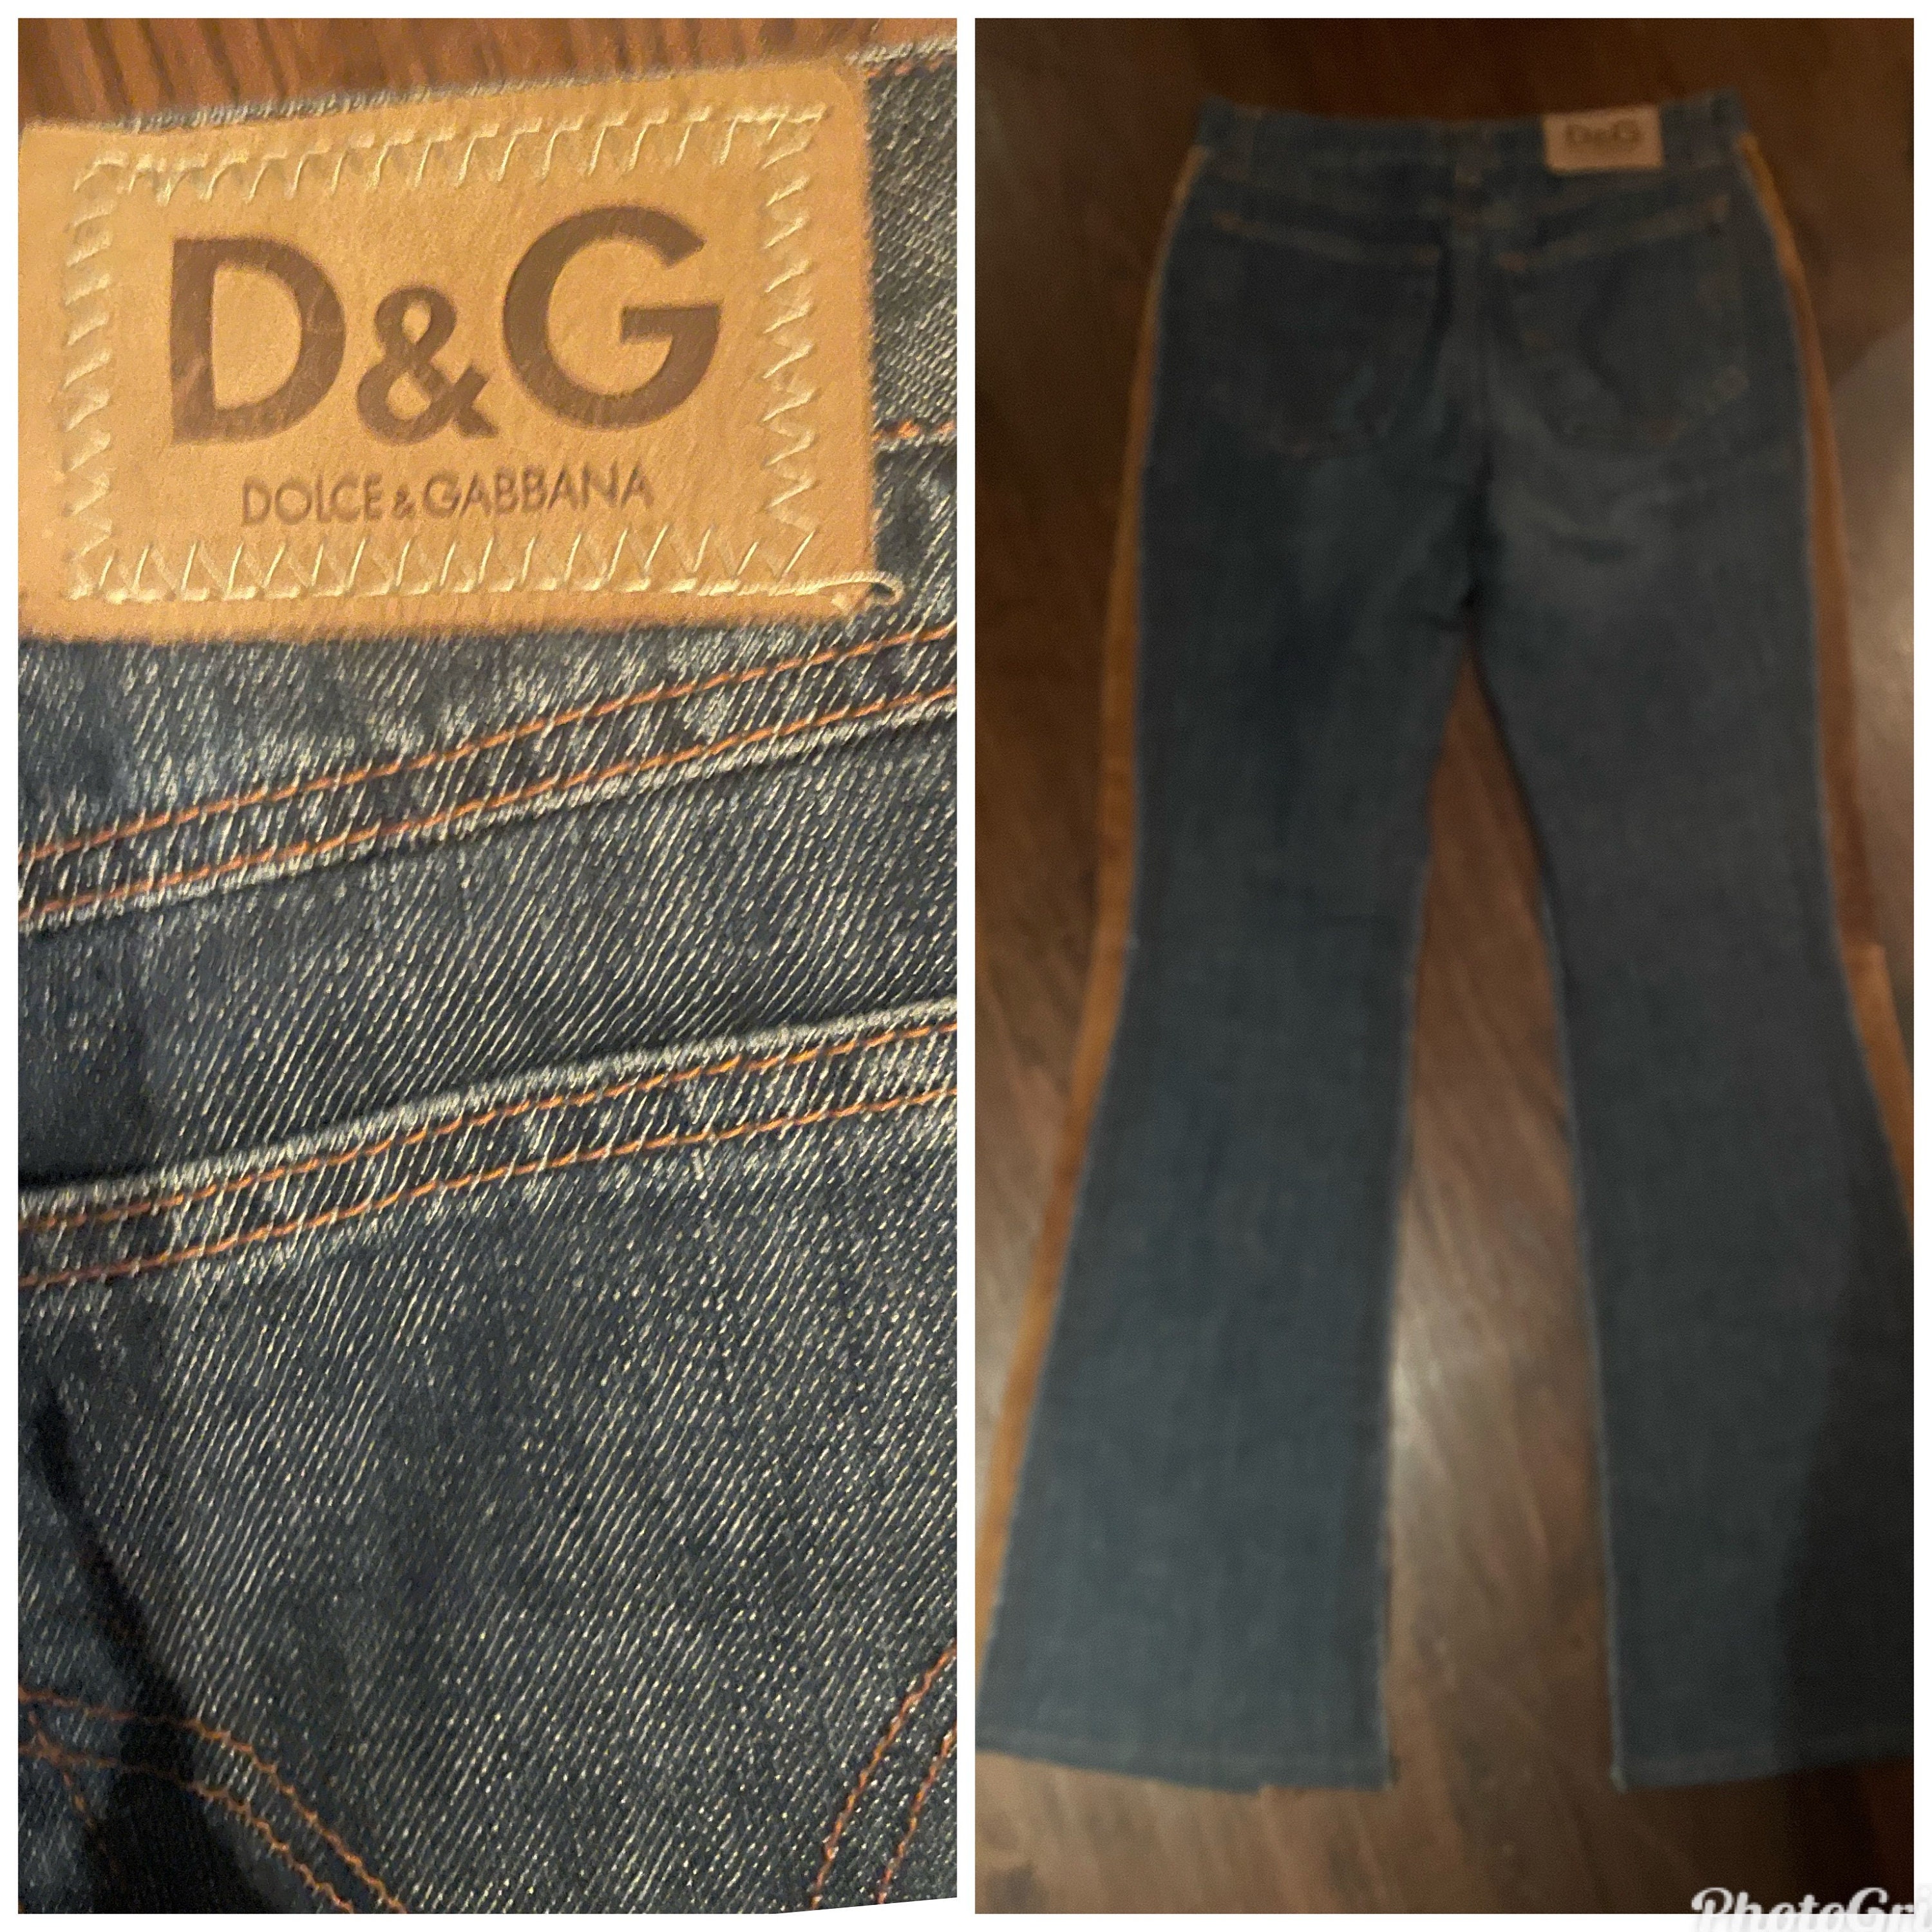 Dolce & Gabbana Jeans With Leather Side Piping SO HOT Flares - Etsy